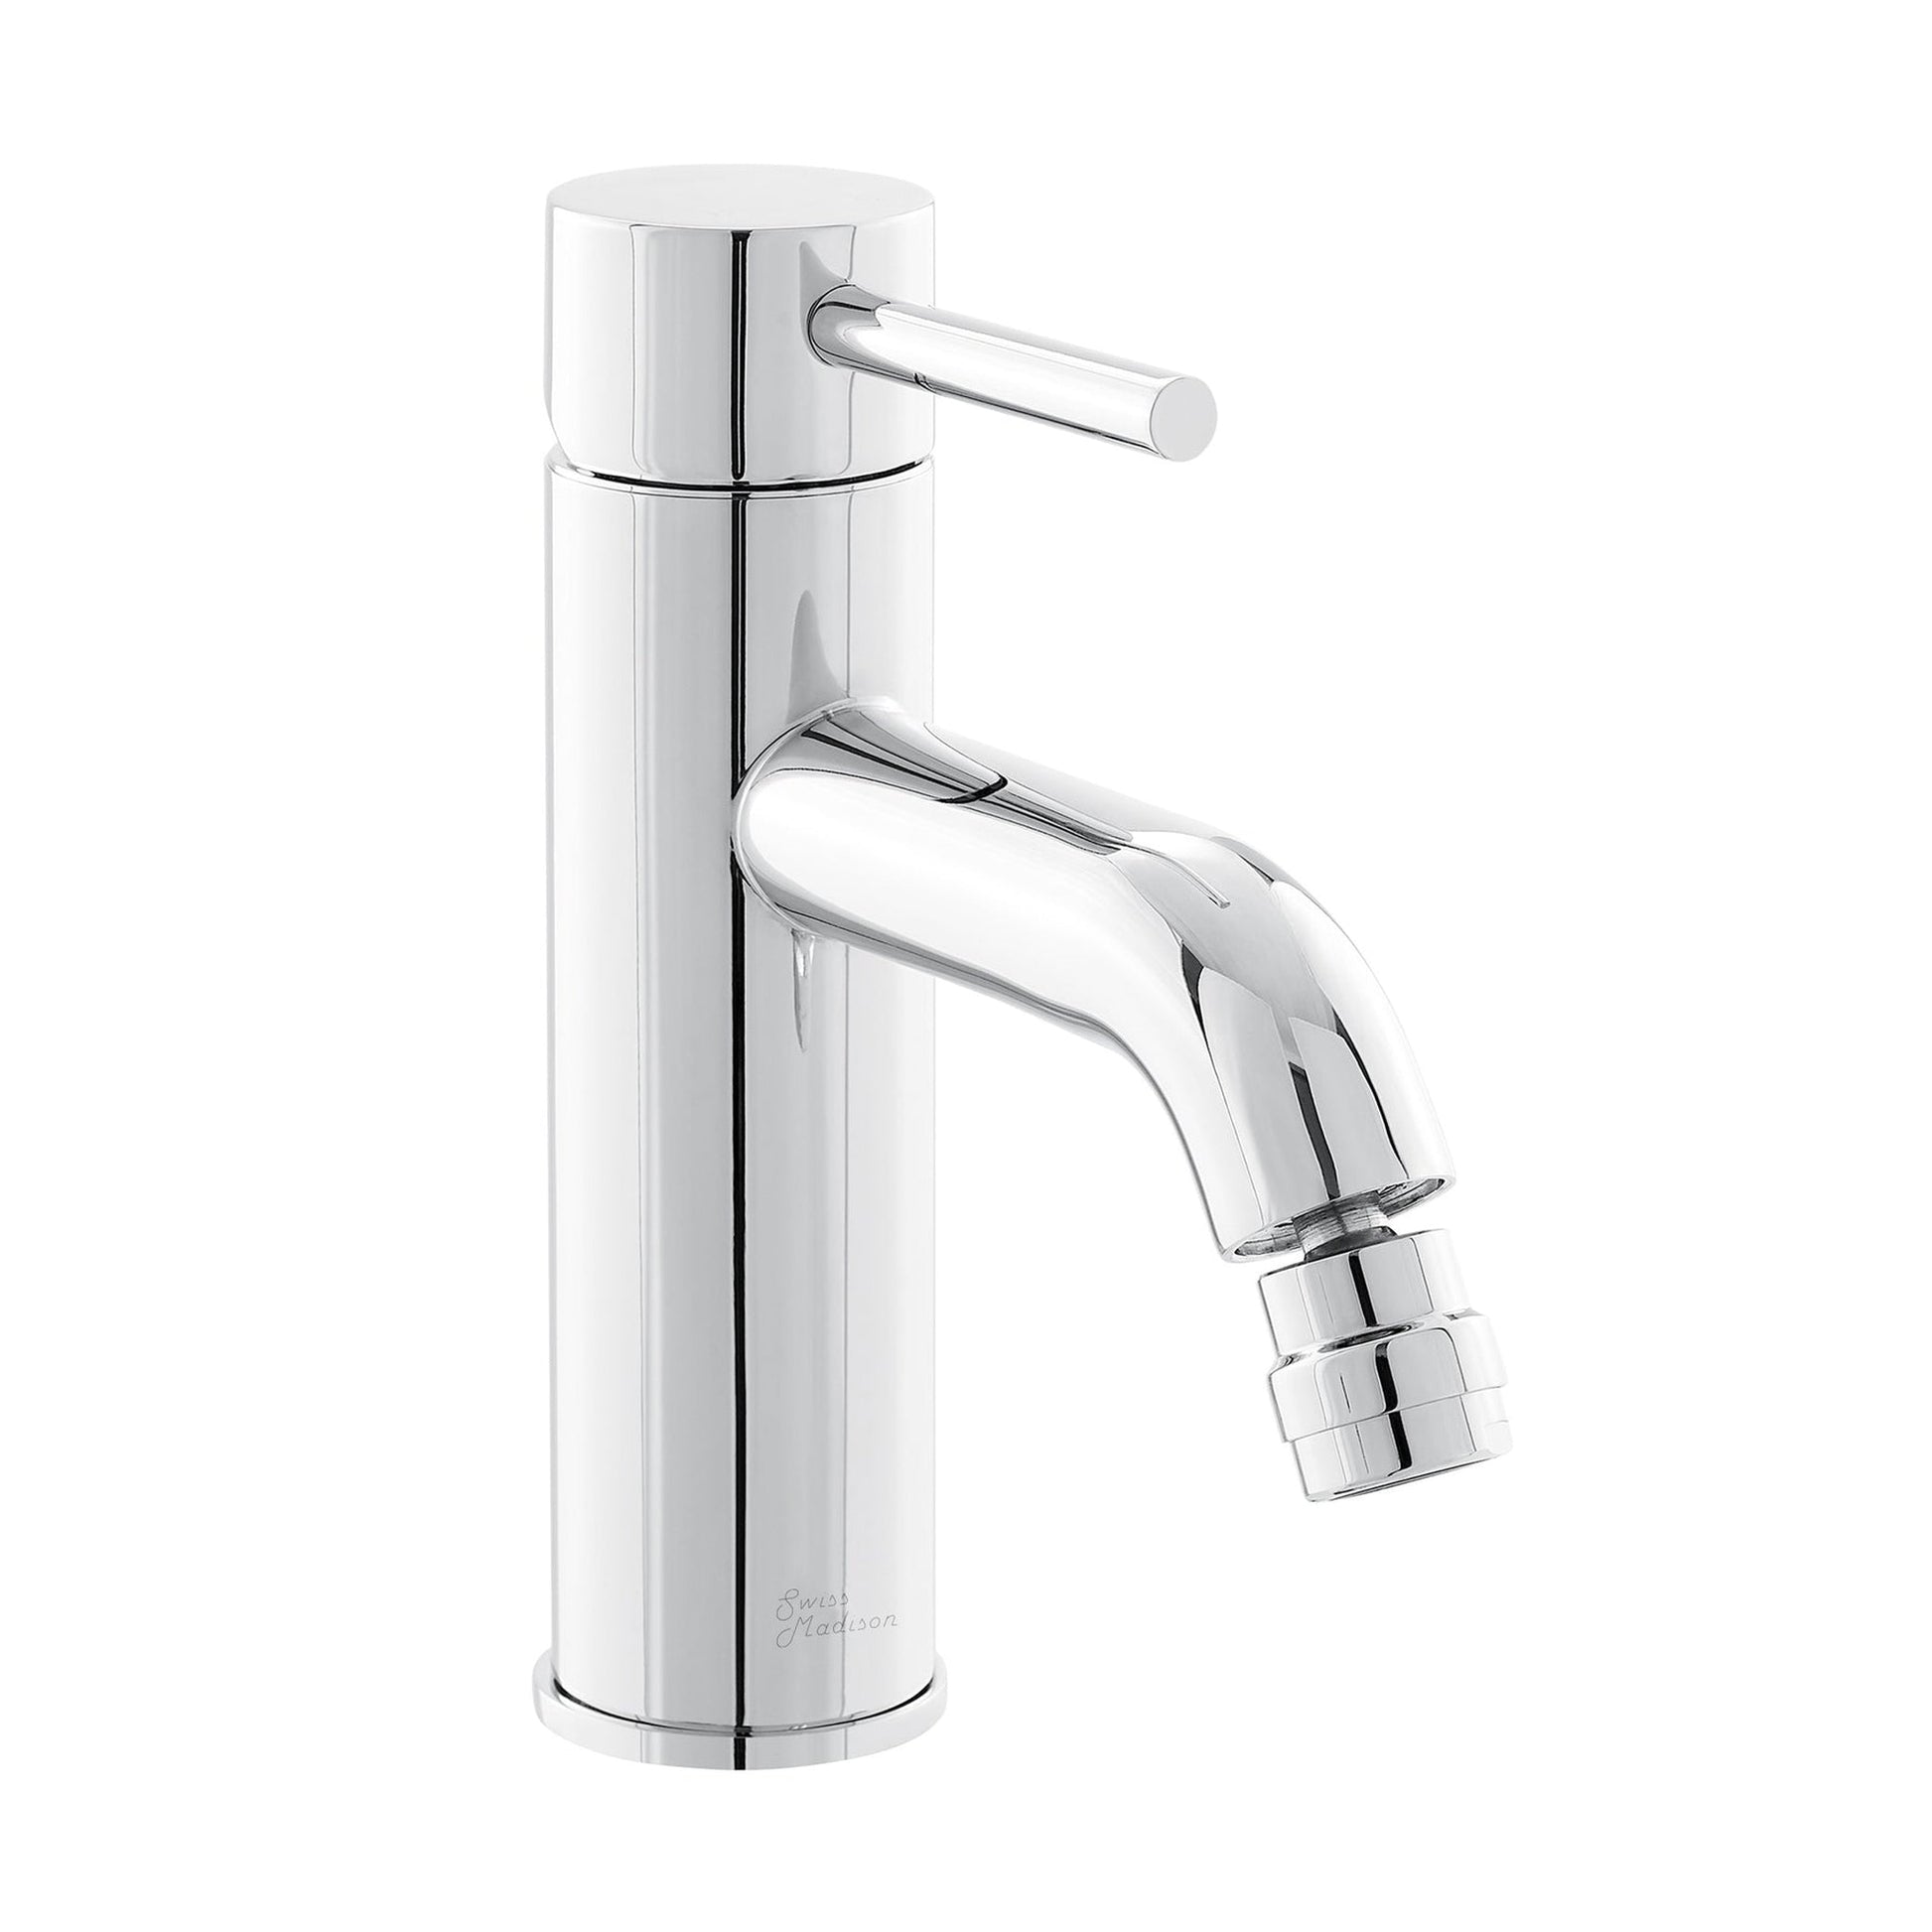 Swiss Madison Ivy 7" Chrome Single Hole Fixture Mounted Bidet Faucet With Flow Rate of 1.28 GPM